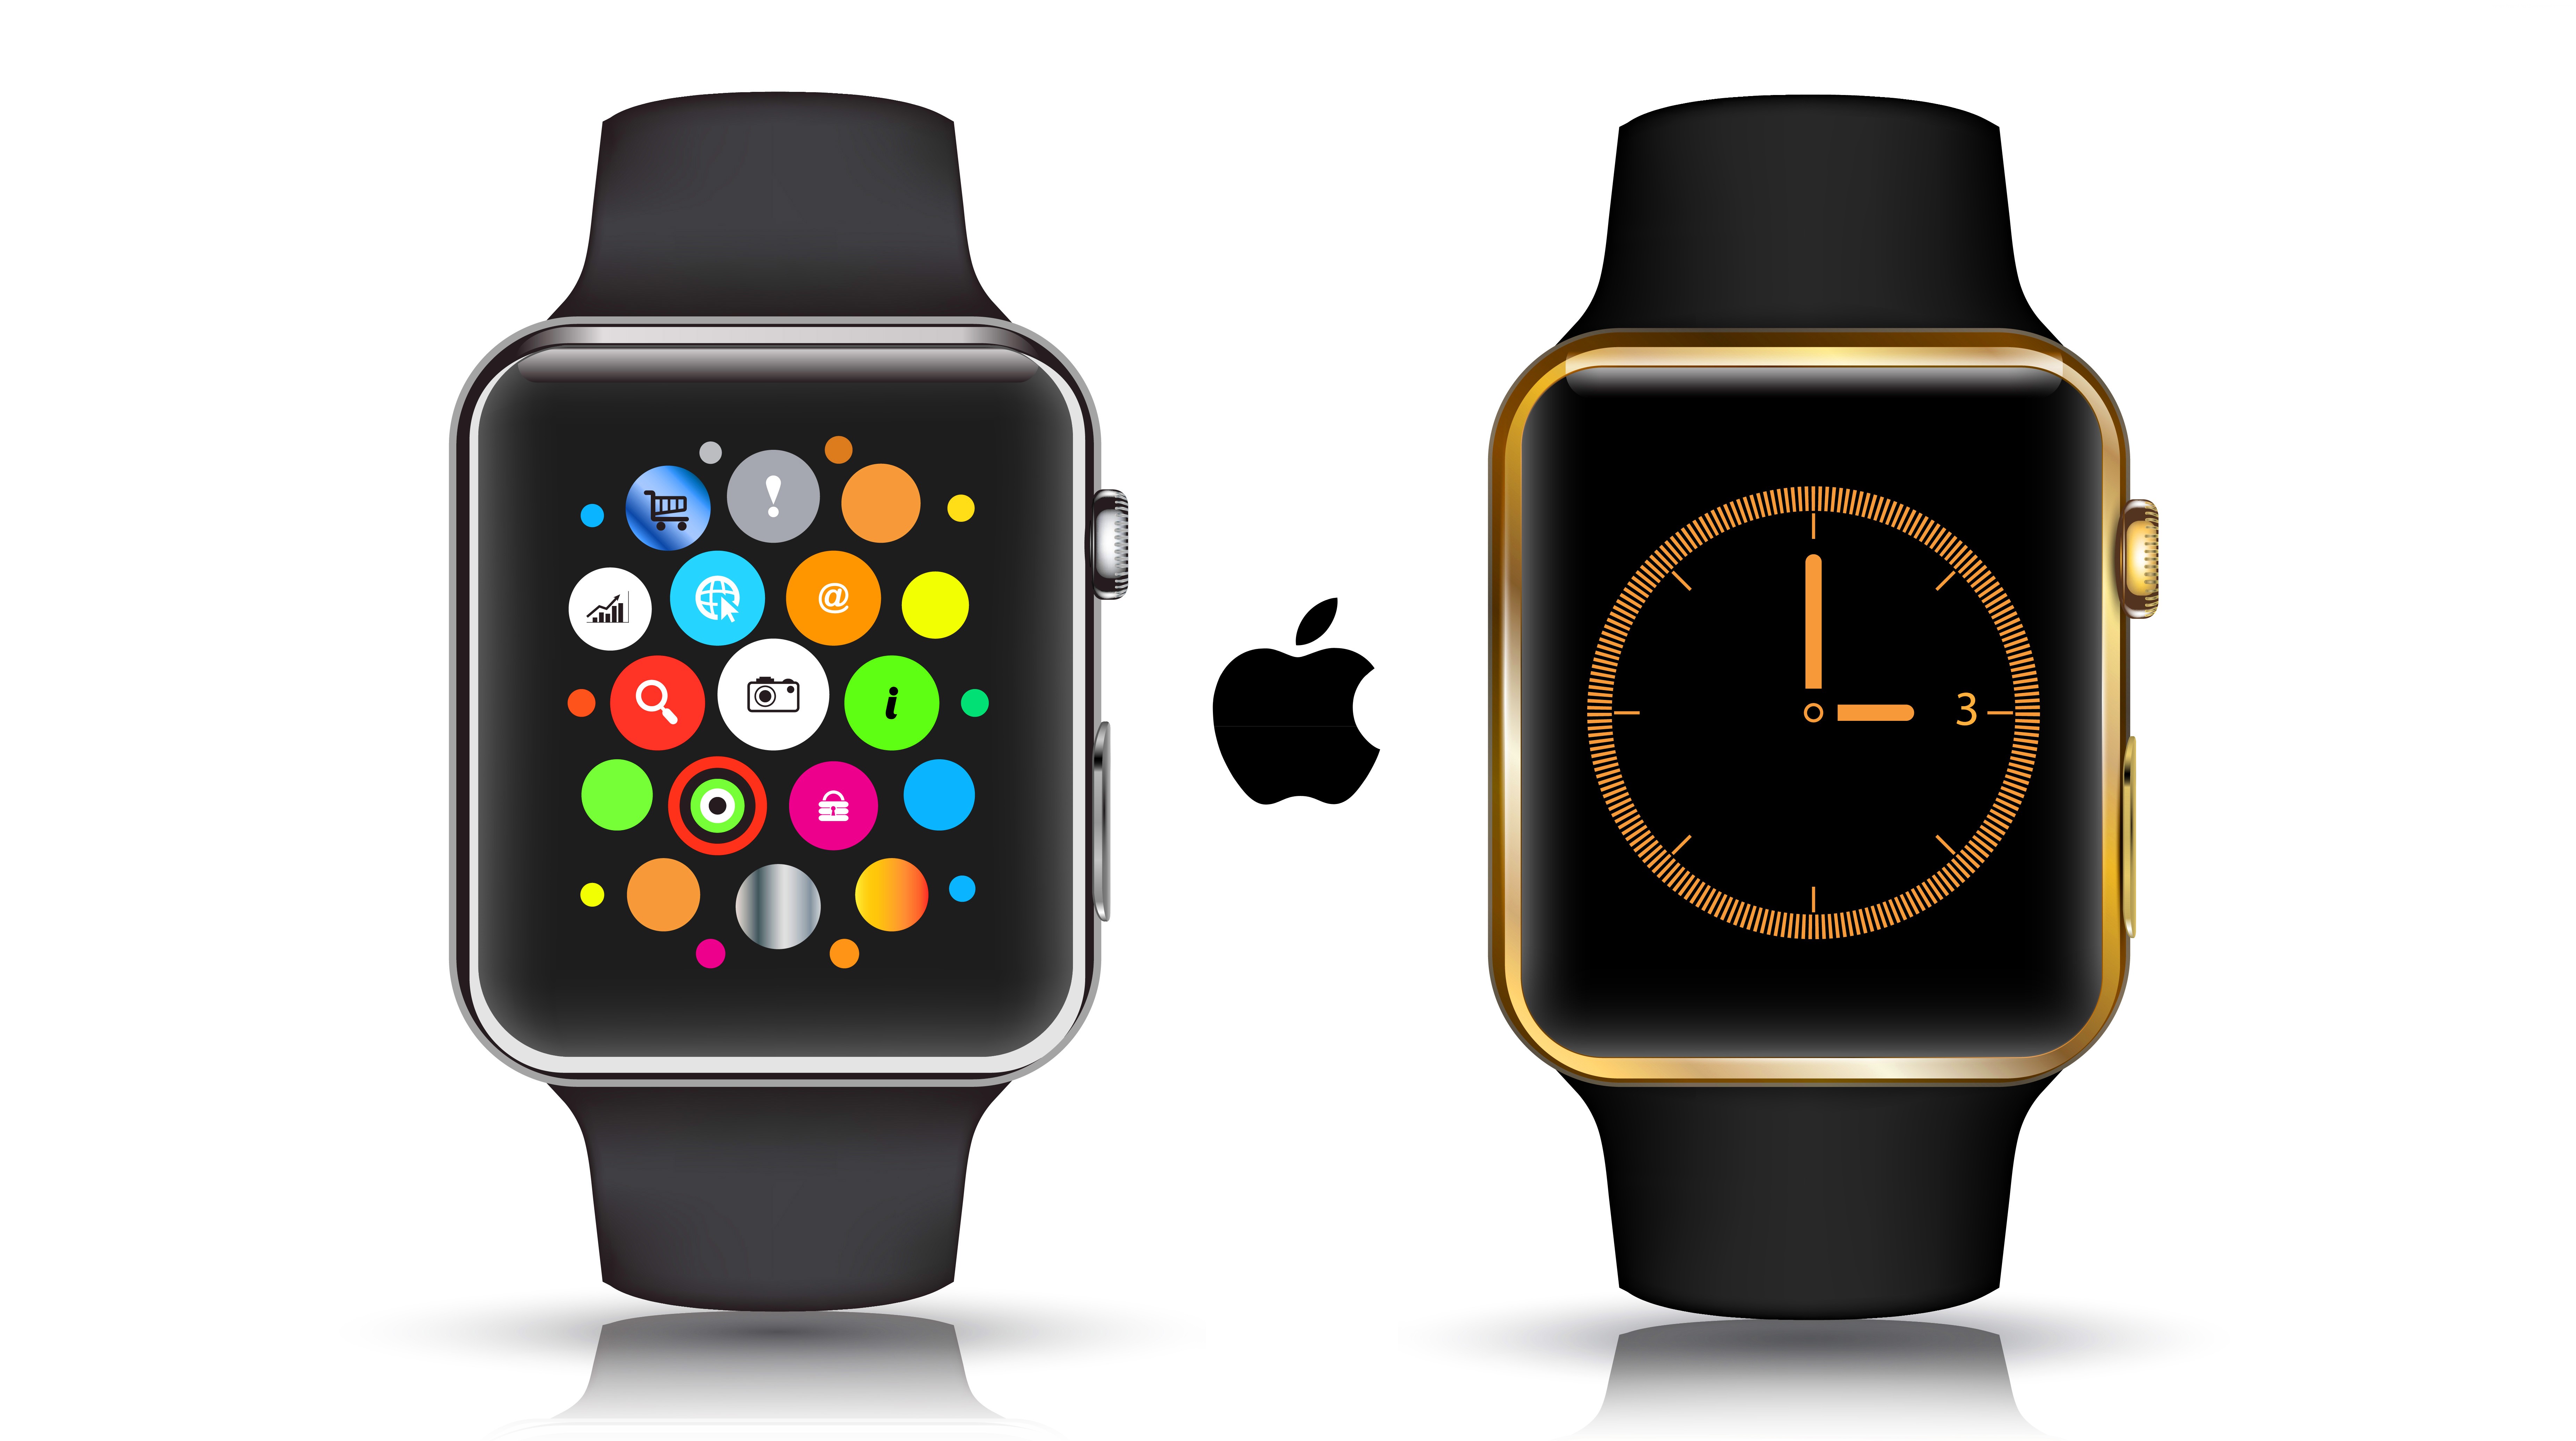 Interface review apple watch real futuristic gadgets watches wallpaper k display silver iwatch k apple